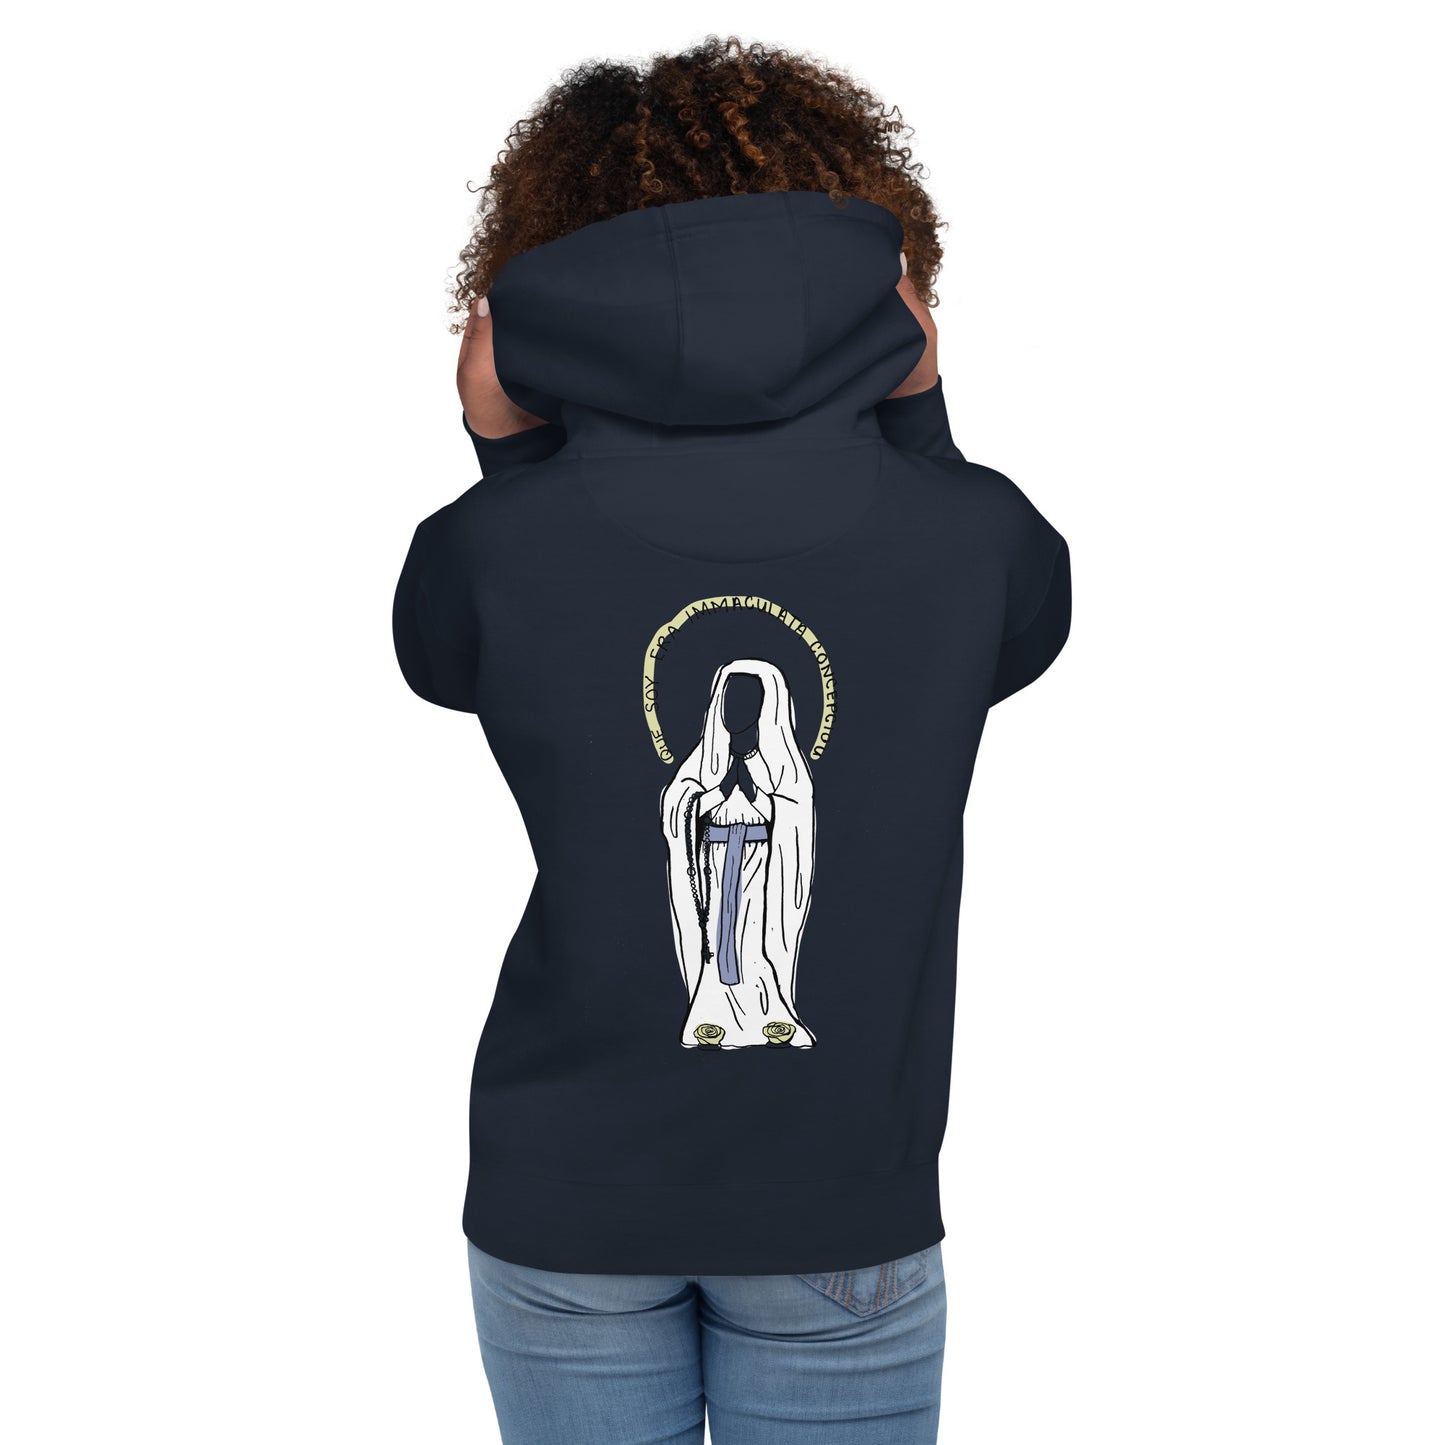 "Our Lady of Lourdes" - Unisex Hoodie